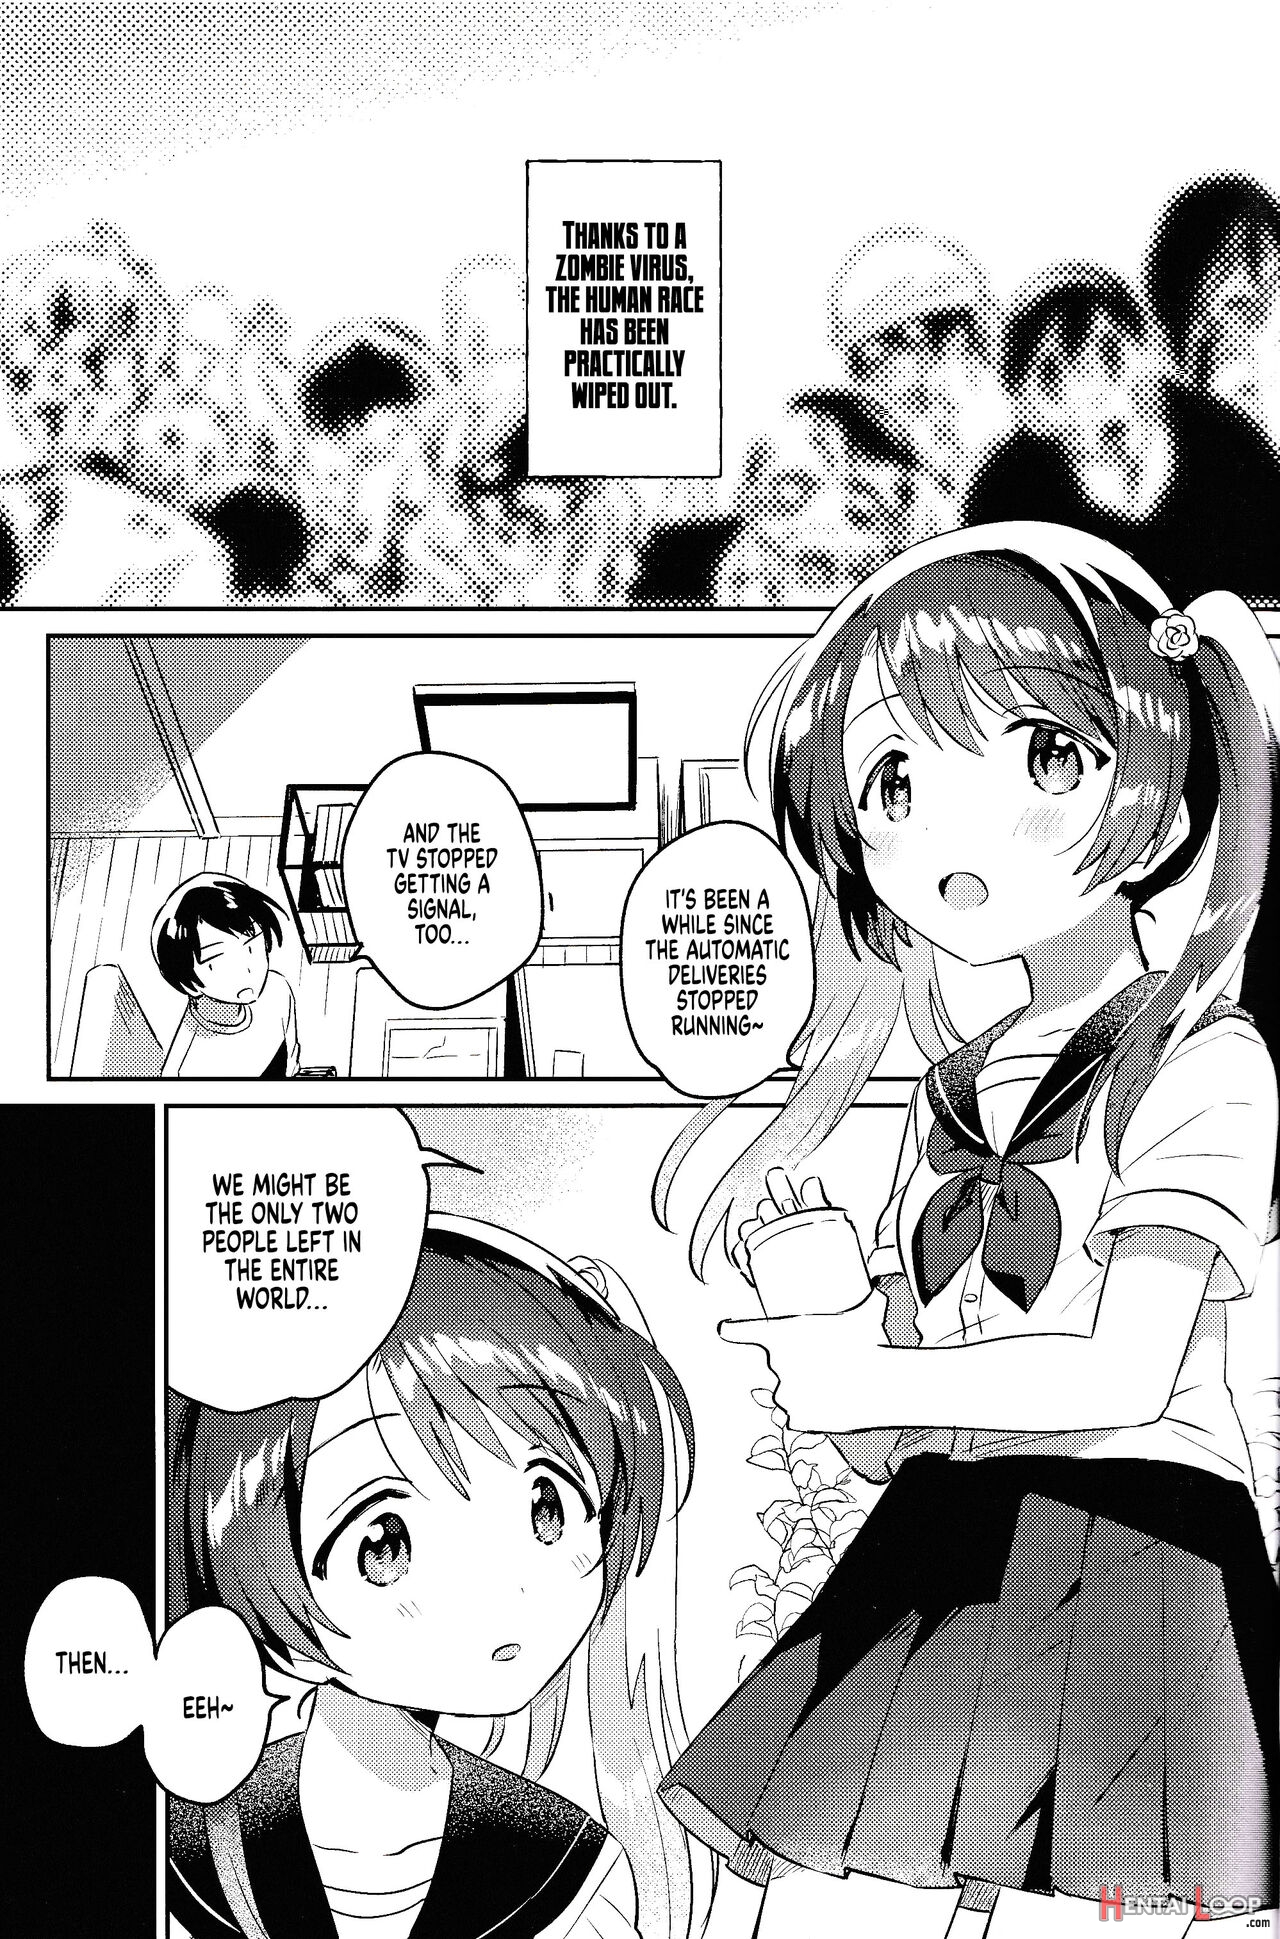 Imouto To Lockdown √heaven page 2